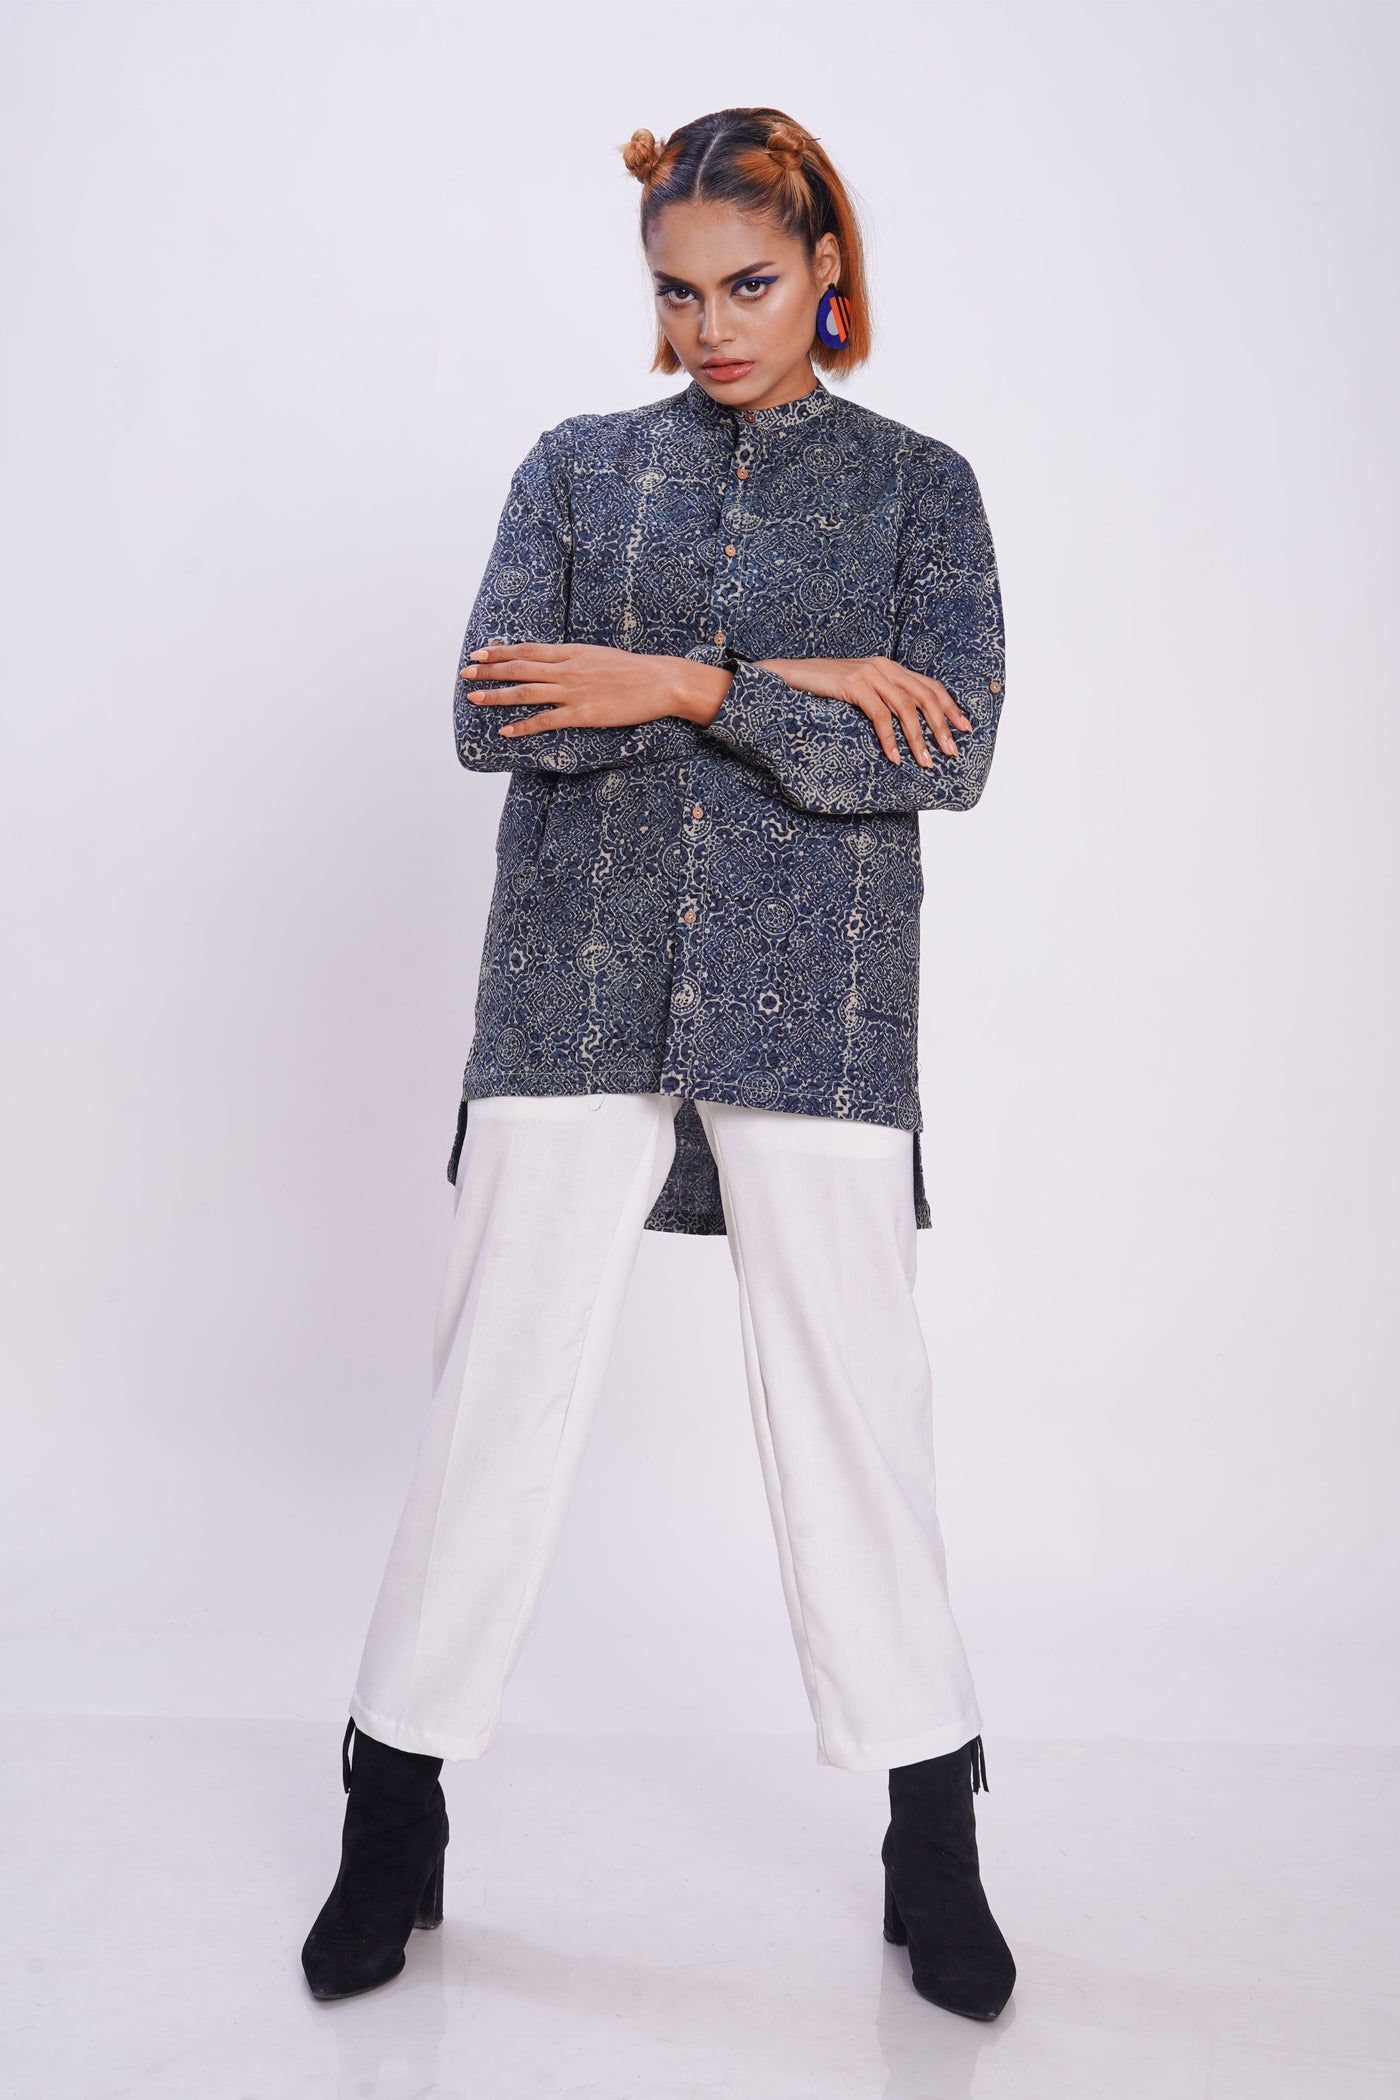 Hand block printed silver lining reliable shirt for women